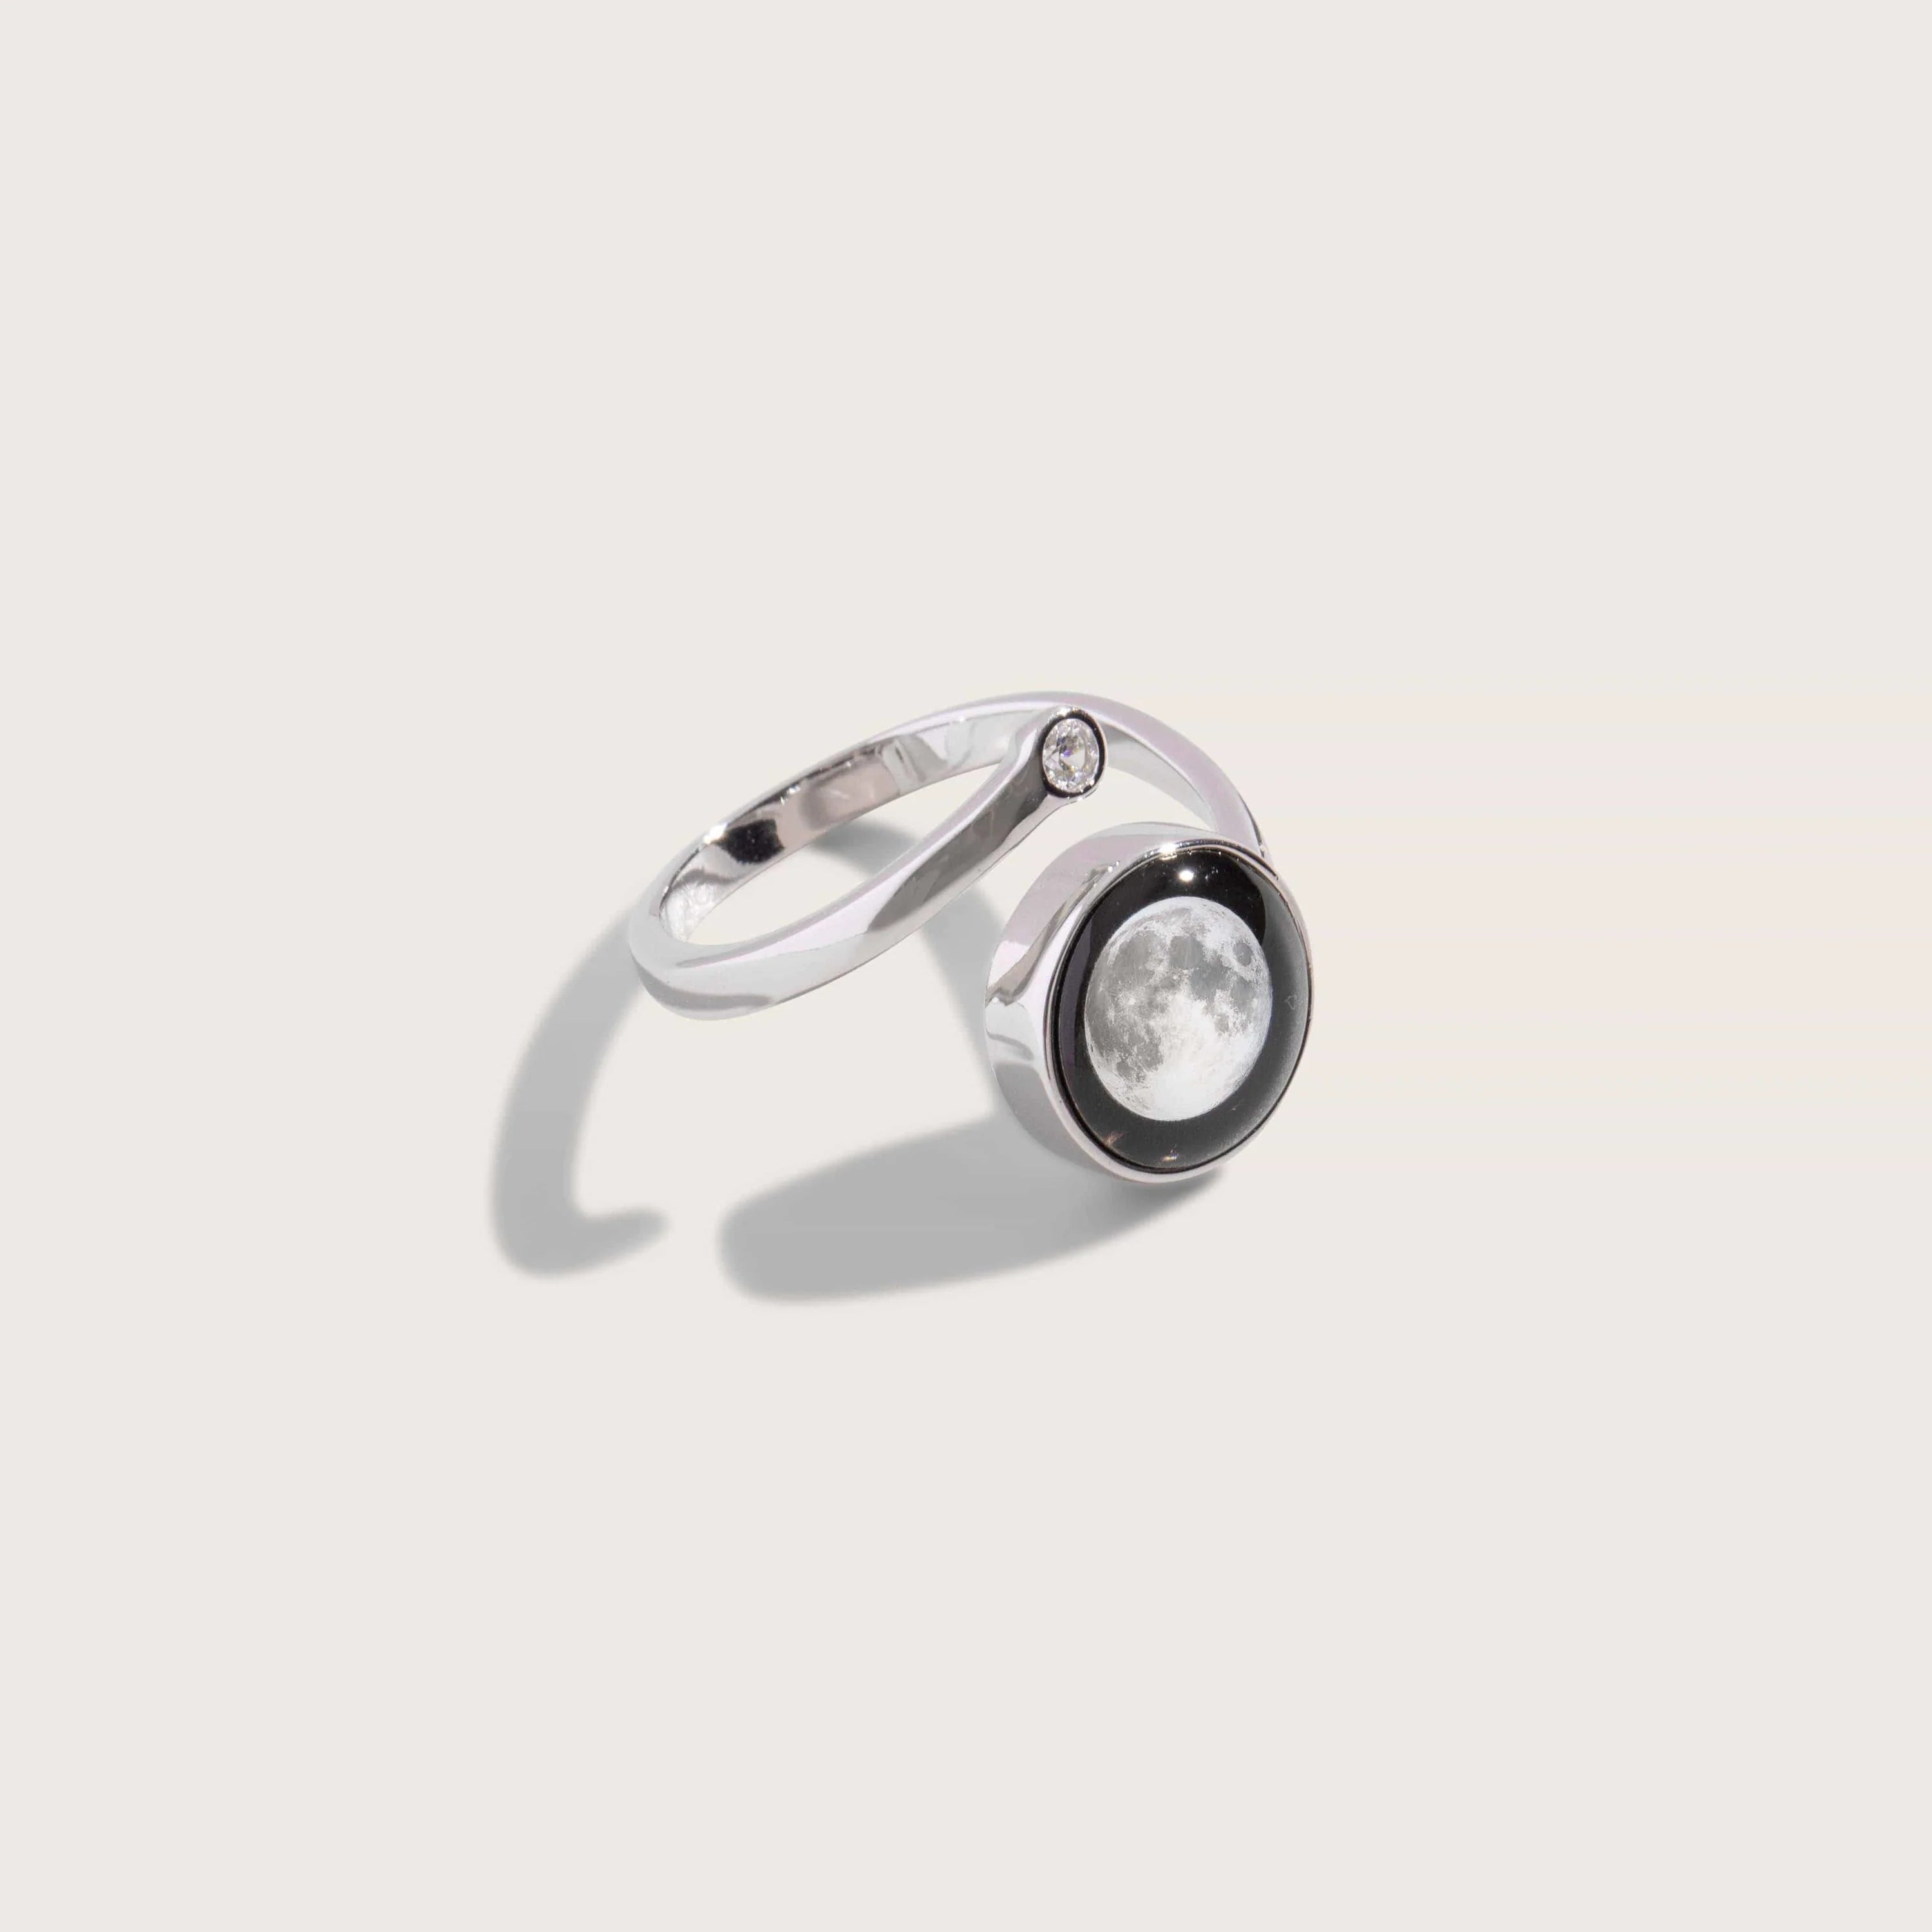 Moonglow Cosmic Spiral Adjustable Ring - Silver